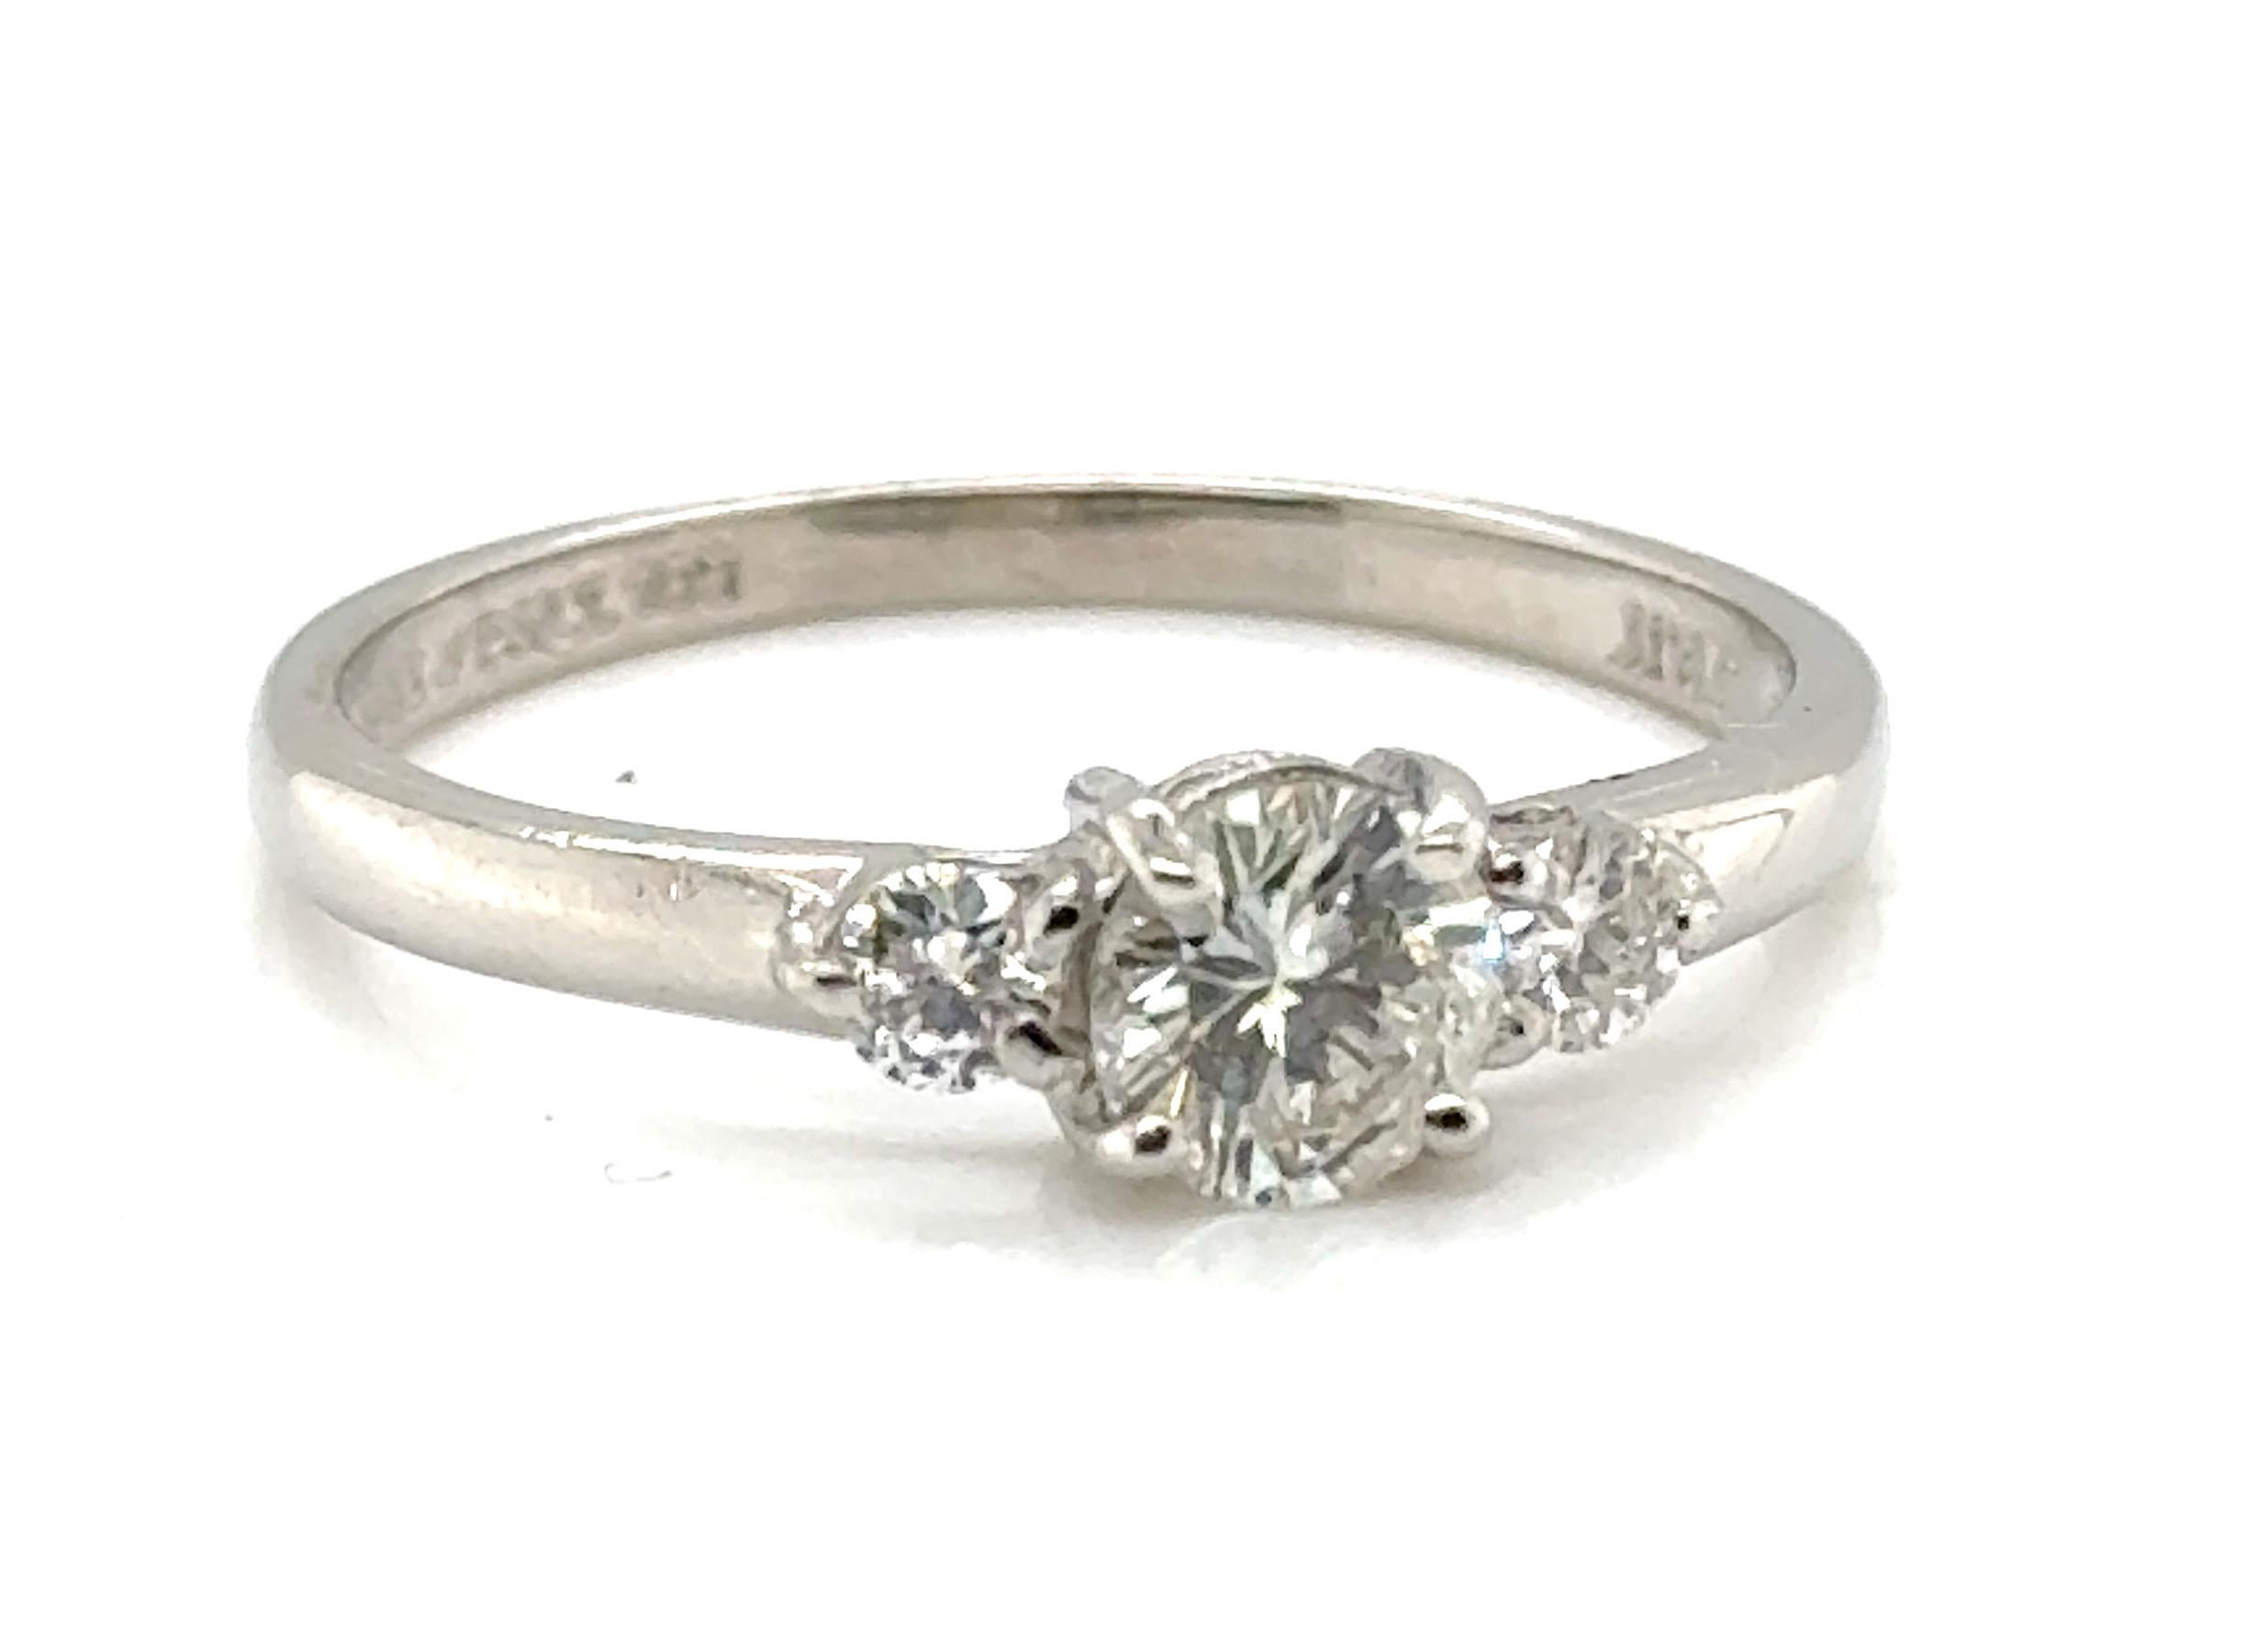 Diamond Engagement Ring .65ct Round Brilliant G-H VS Platinum


Featuring a Magnificent .50ct G-H/VS Genuine Natural Round Brilliant Cut Diamond Center

A 1/2 Carat Diamond is $1,500 Wholesale

You Can't Buy a Platinum Mounting Without Diamonds